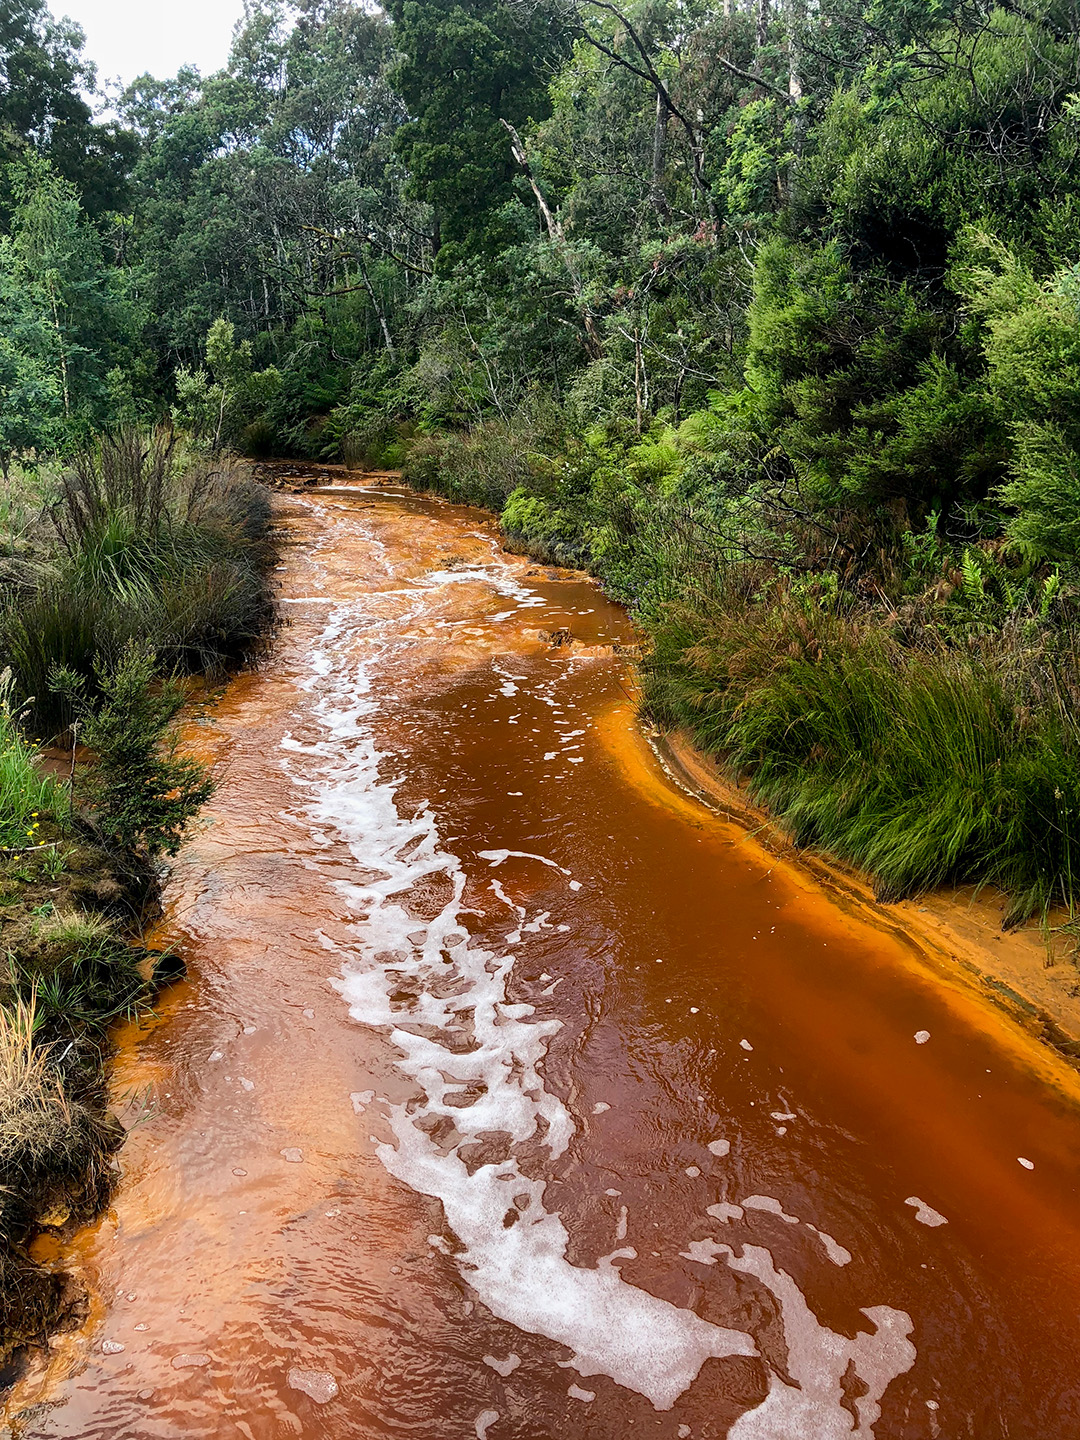 Haulage Creek - red water in a flowing river